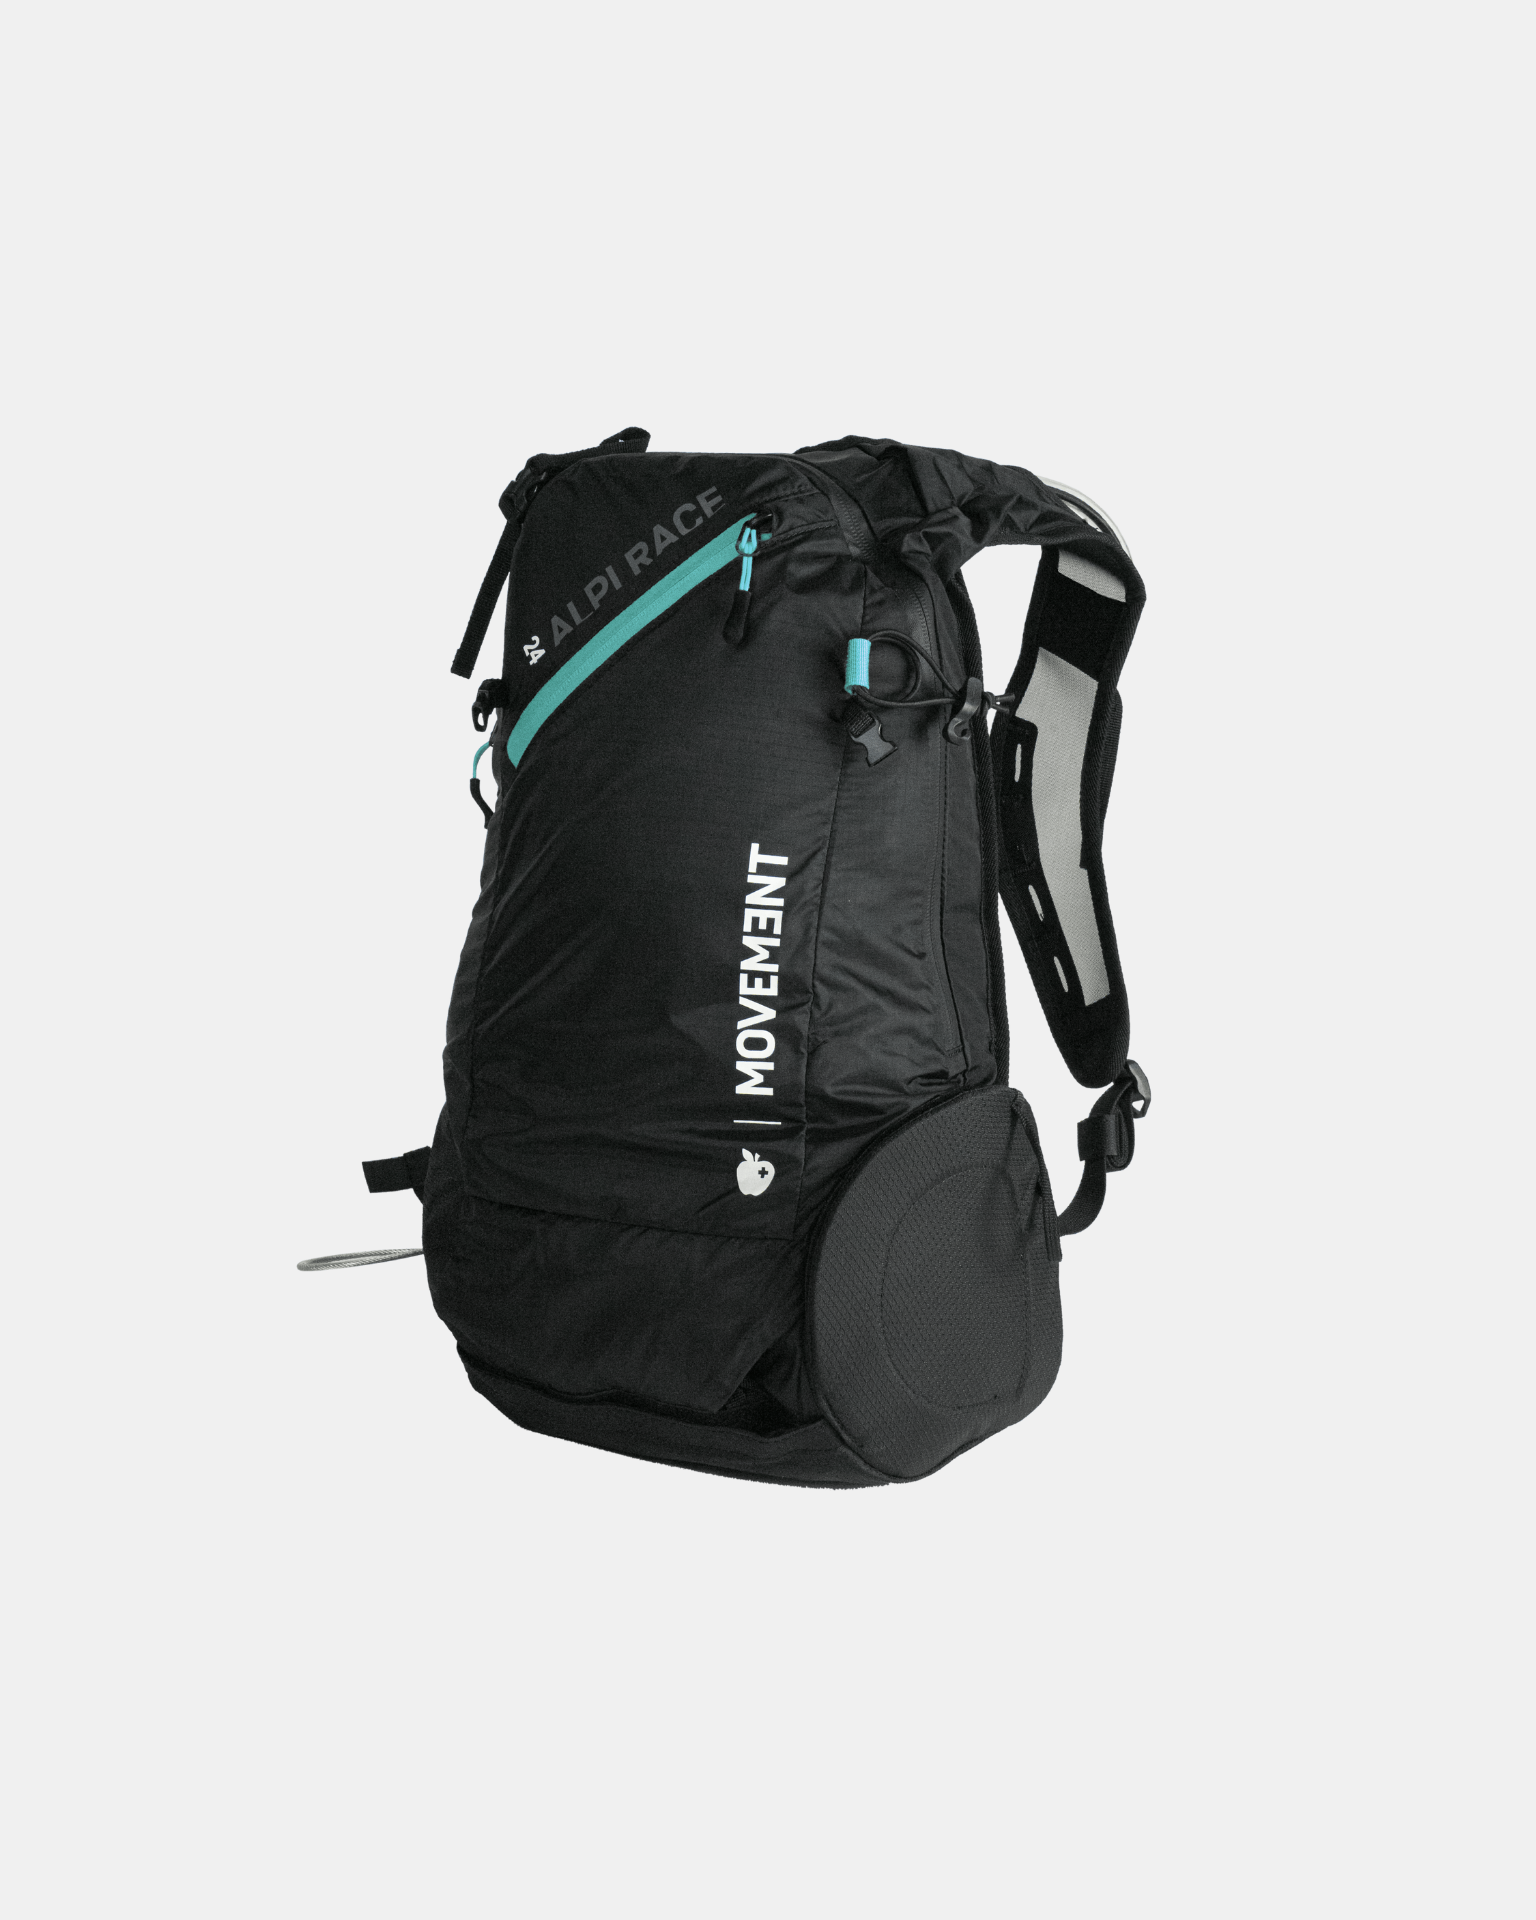 Streamline your speed touring adventures with Movement&#39;s Alpi Race backpack.